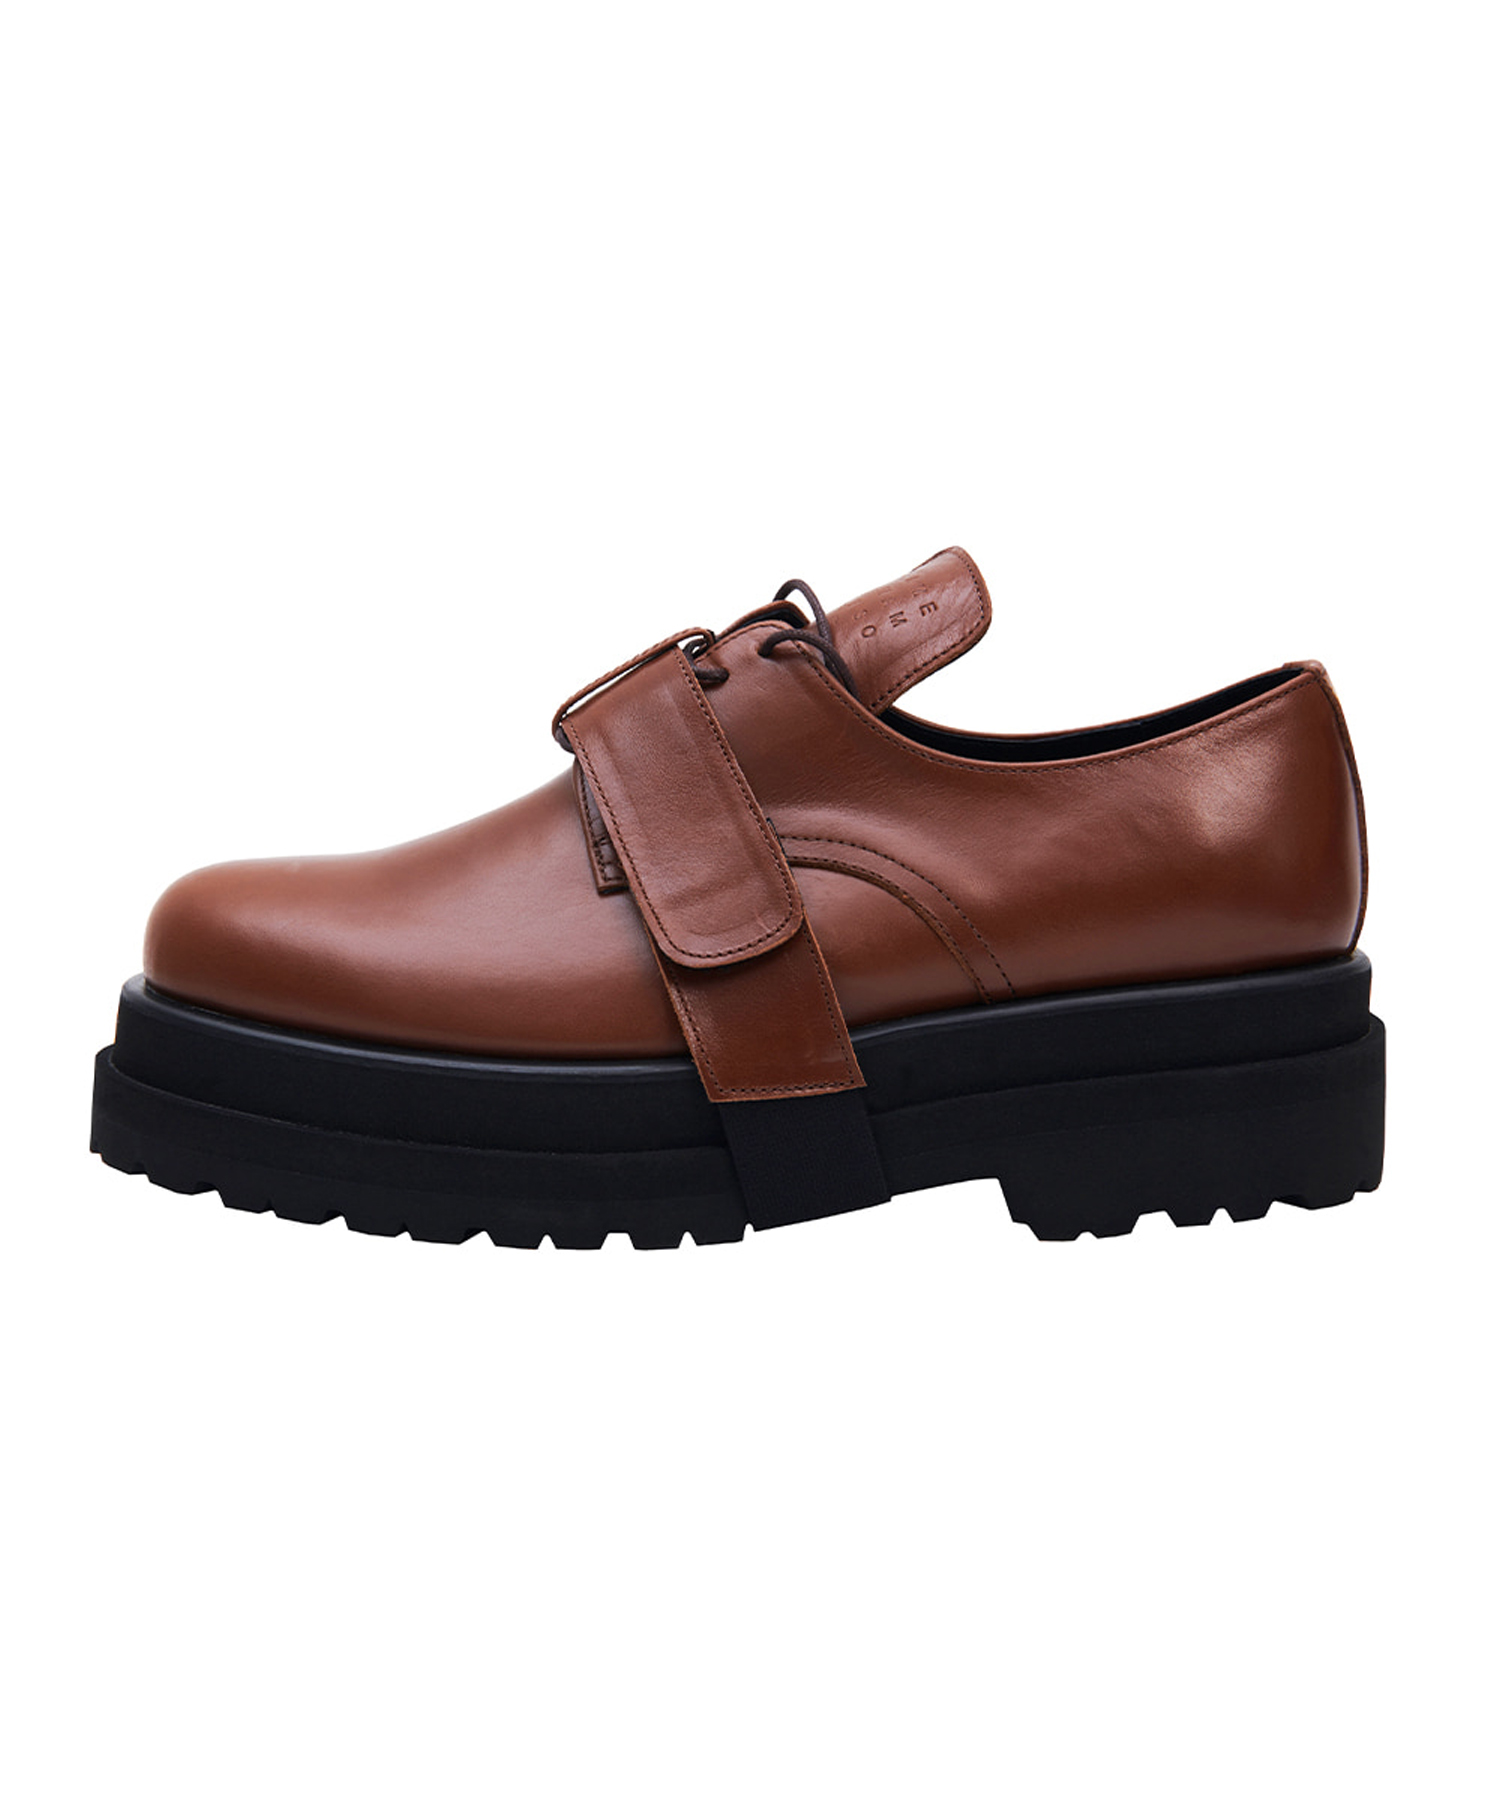 LMMM BROWN BAND DERBY SHOES